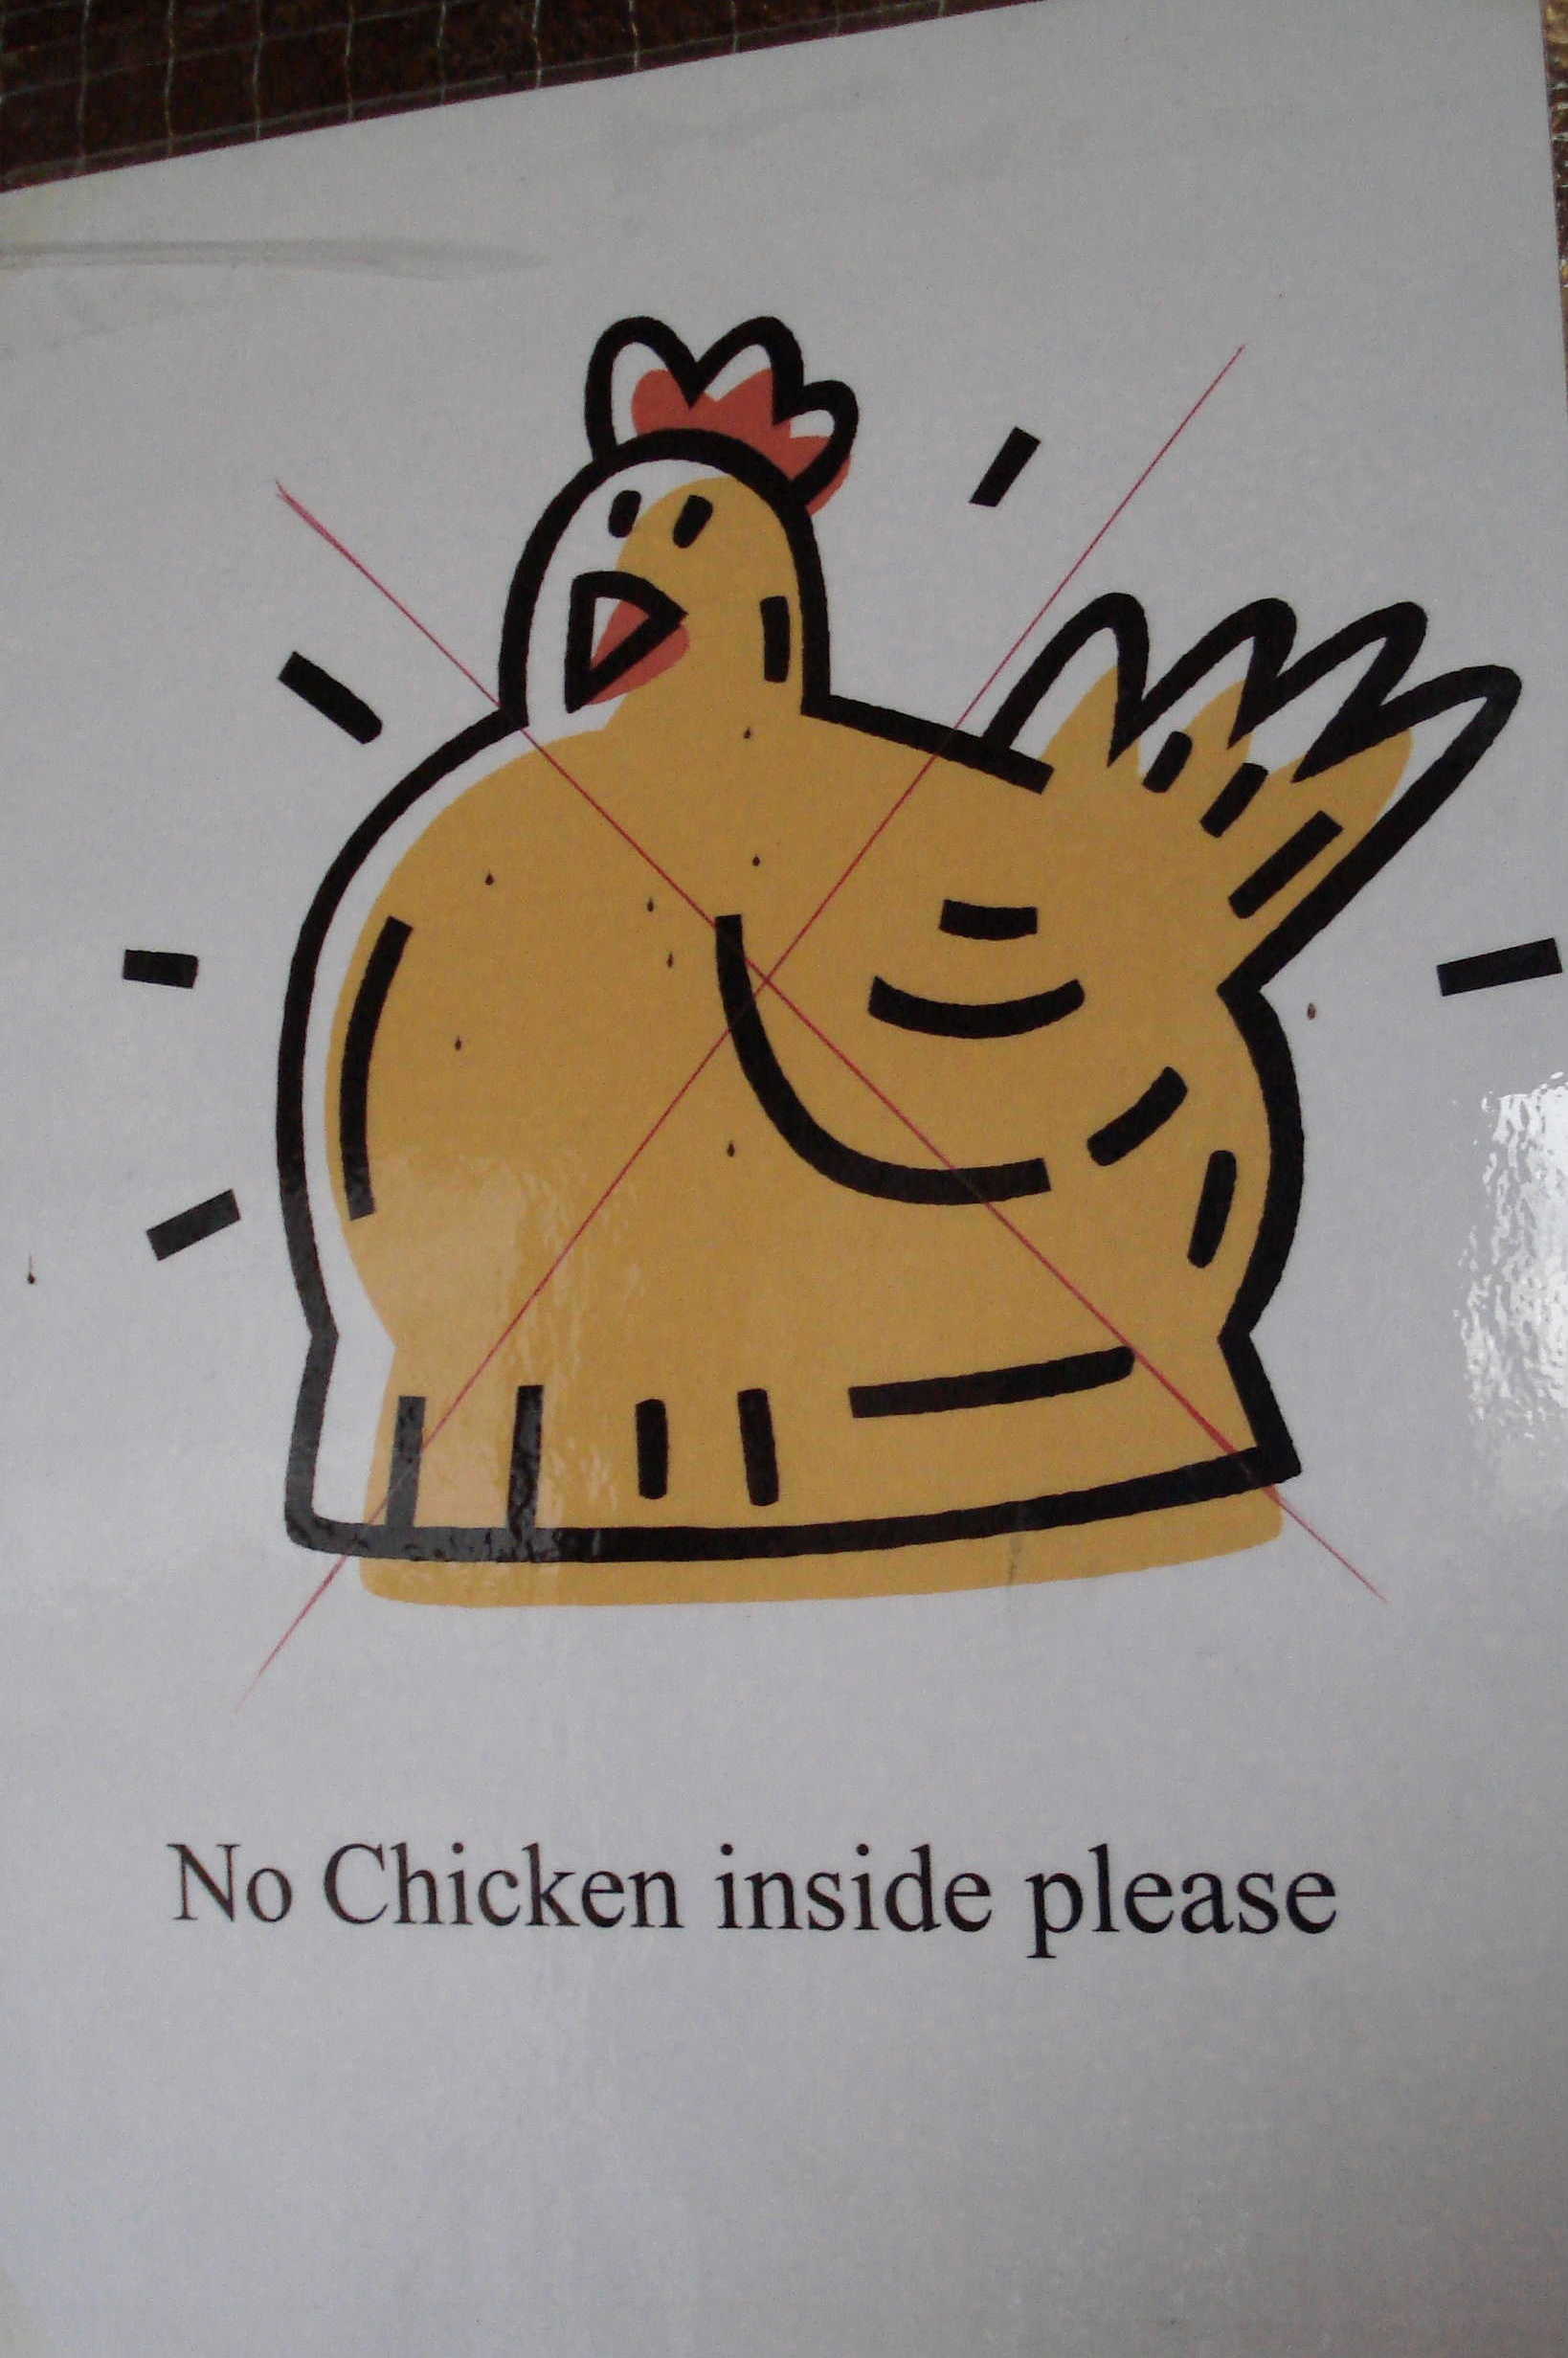 "No chicken inside please" sign of cartoon chicken with a cross through it